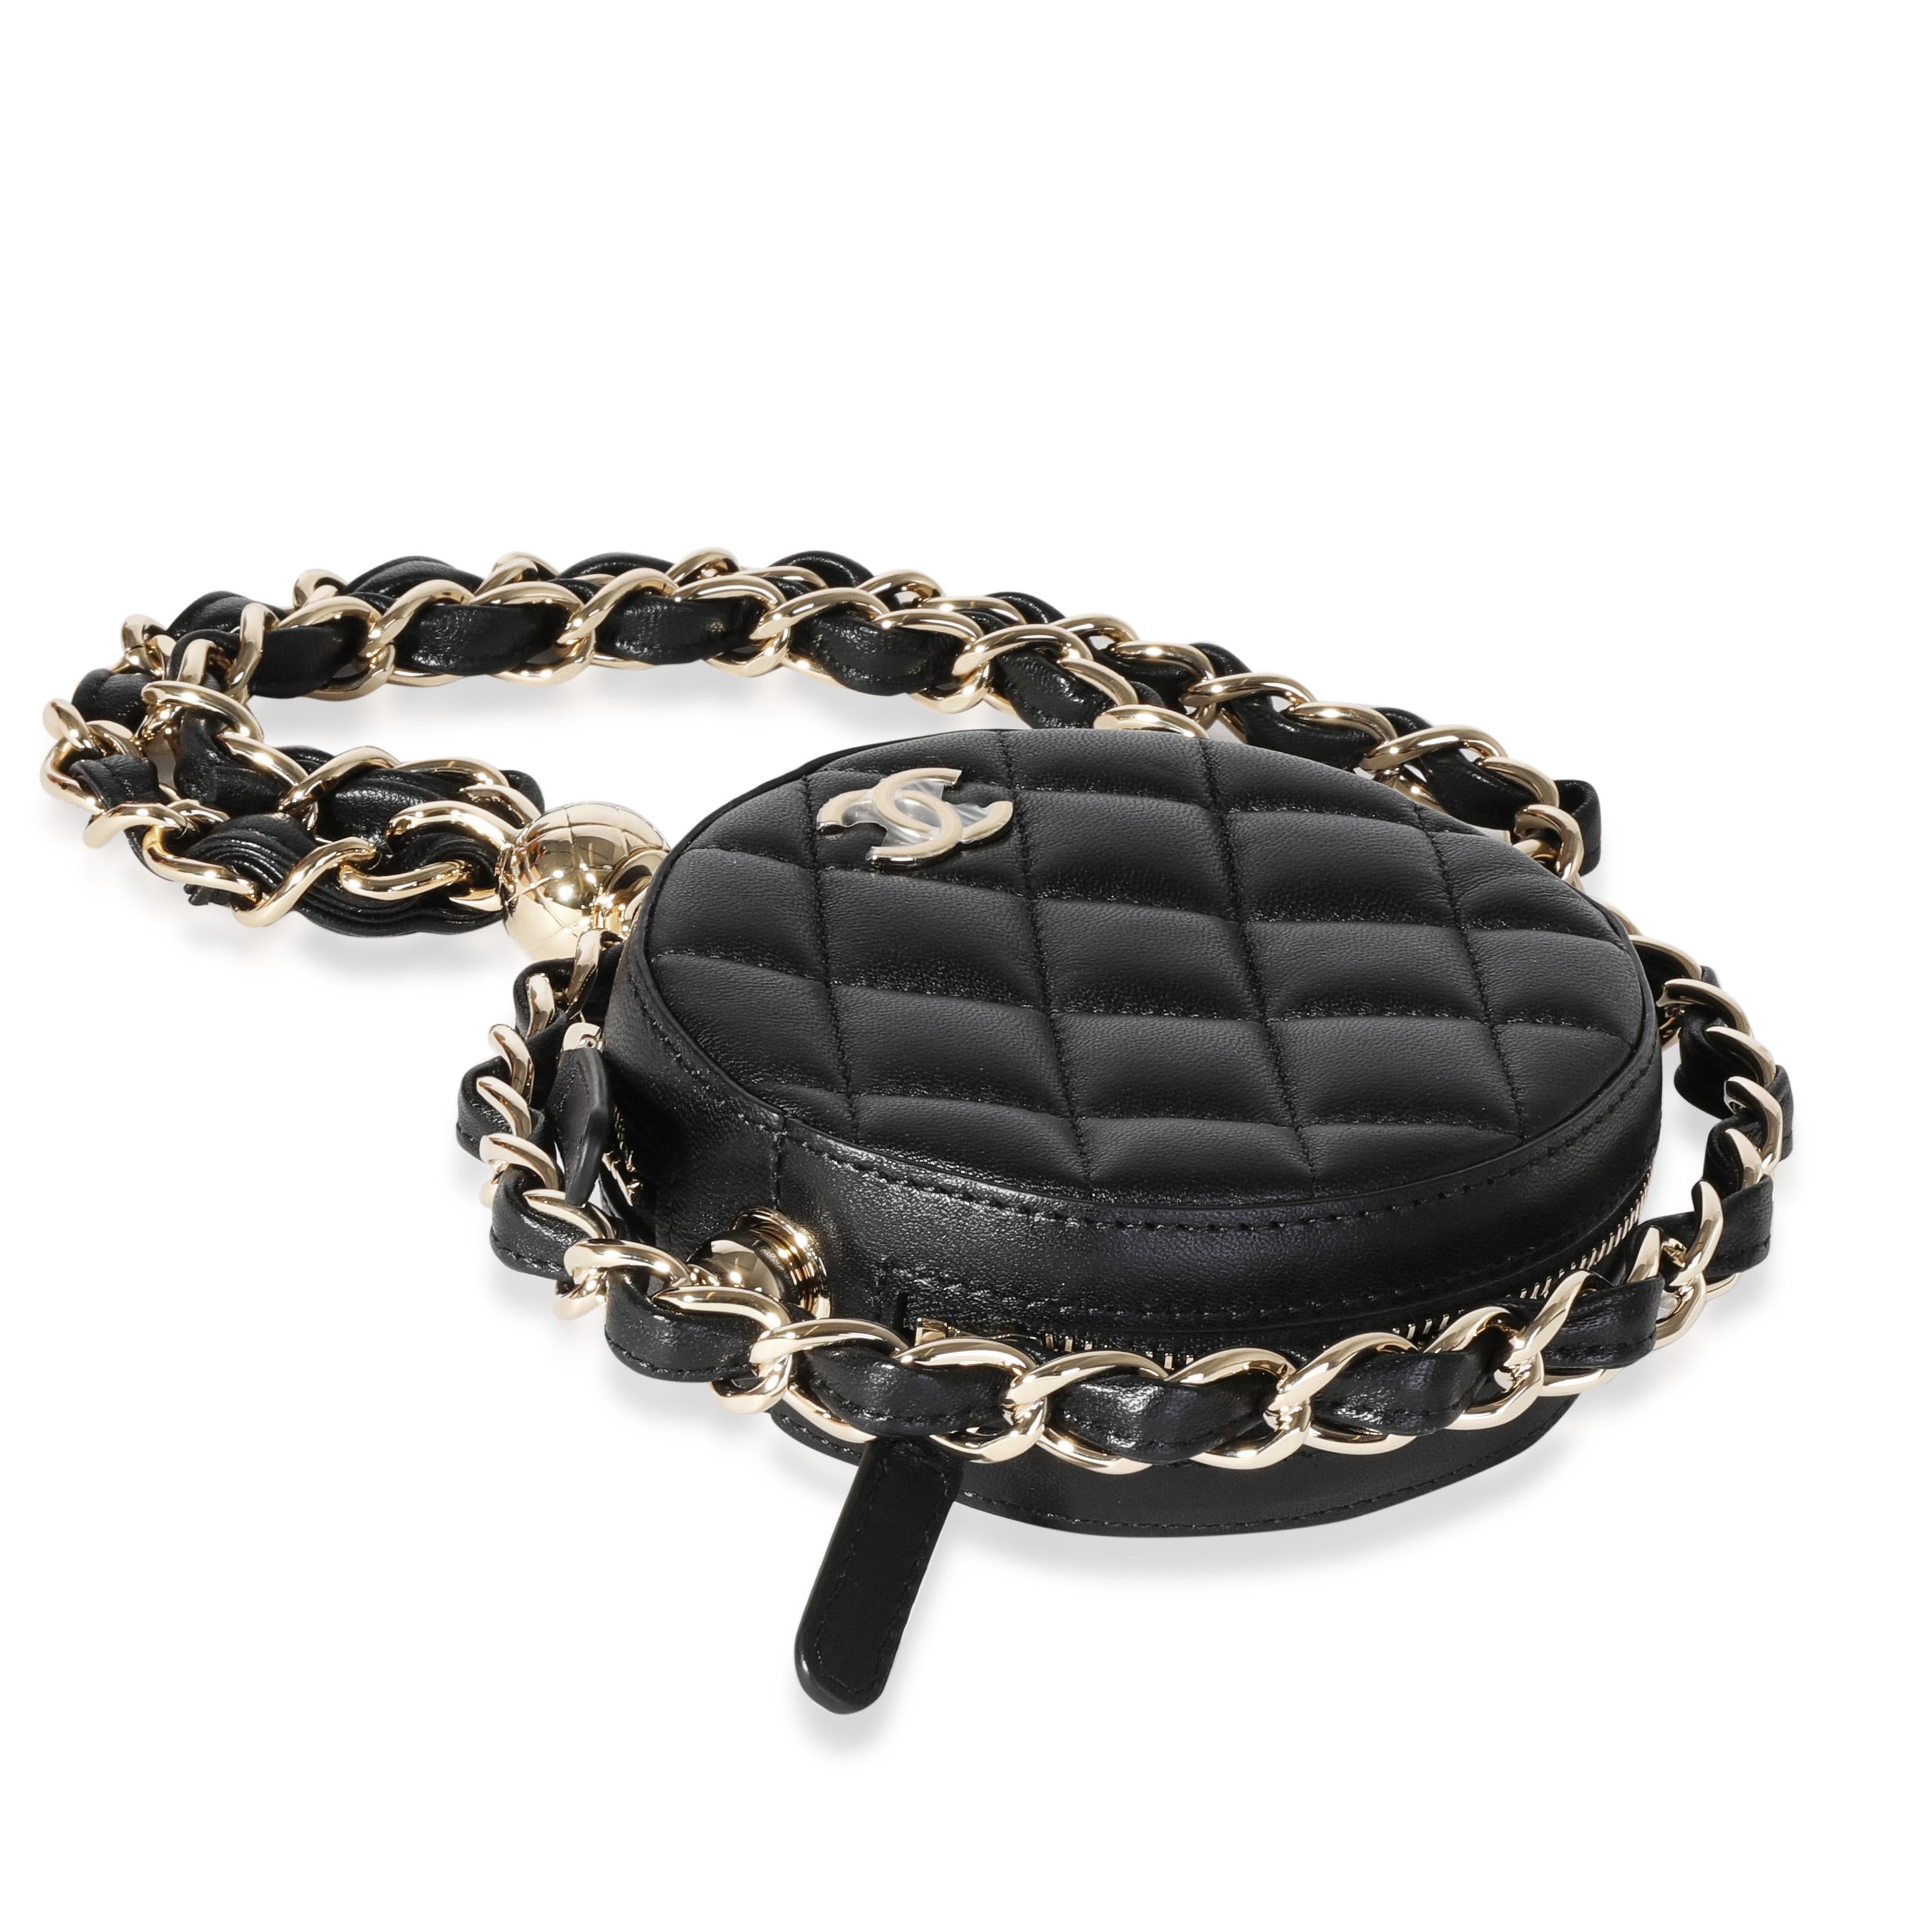 Black Chanel Quilted Lambskin Clutch with Chain